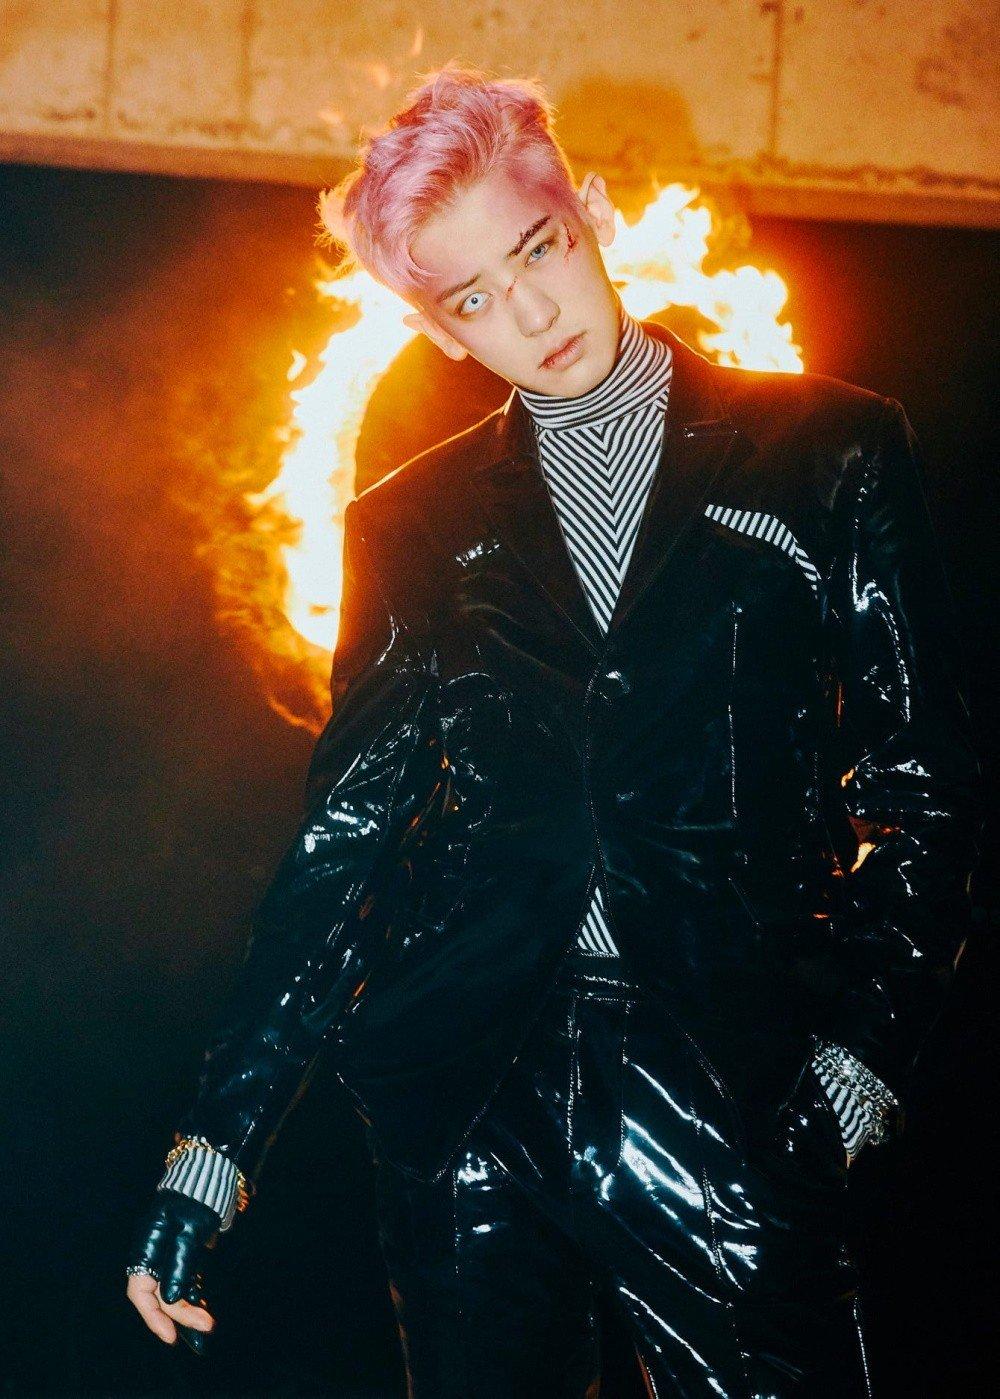 EXO's Chanyeol faces himself in 'Obsession' teaser image